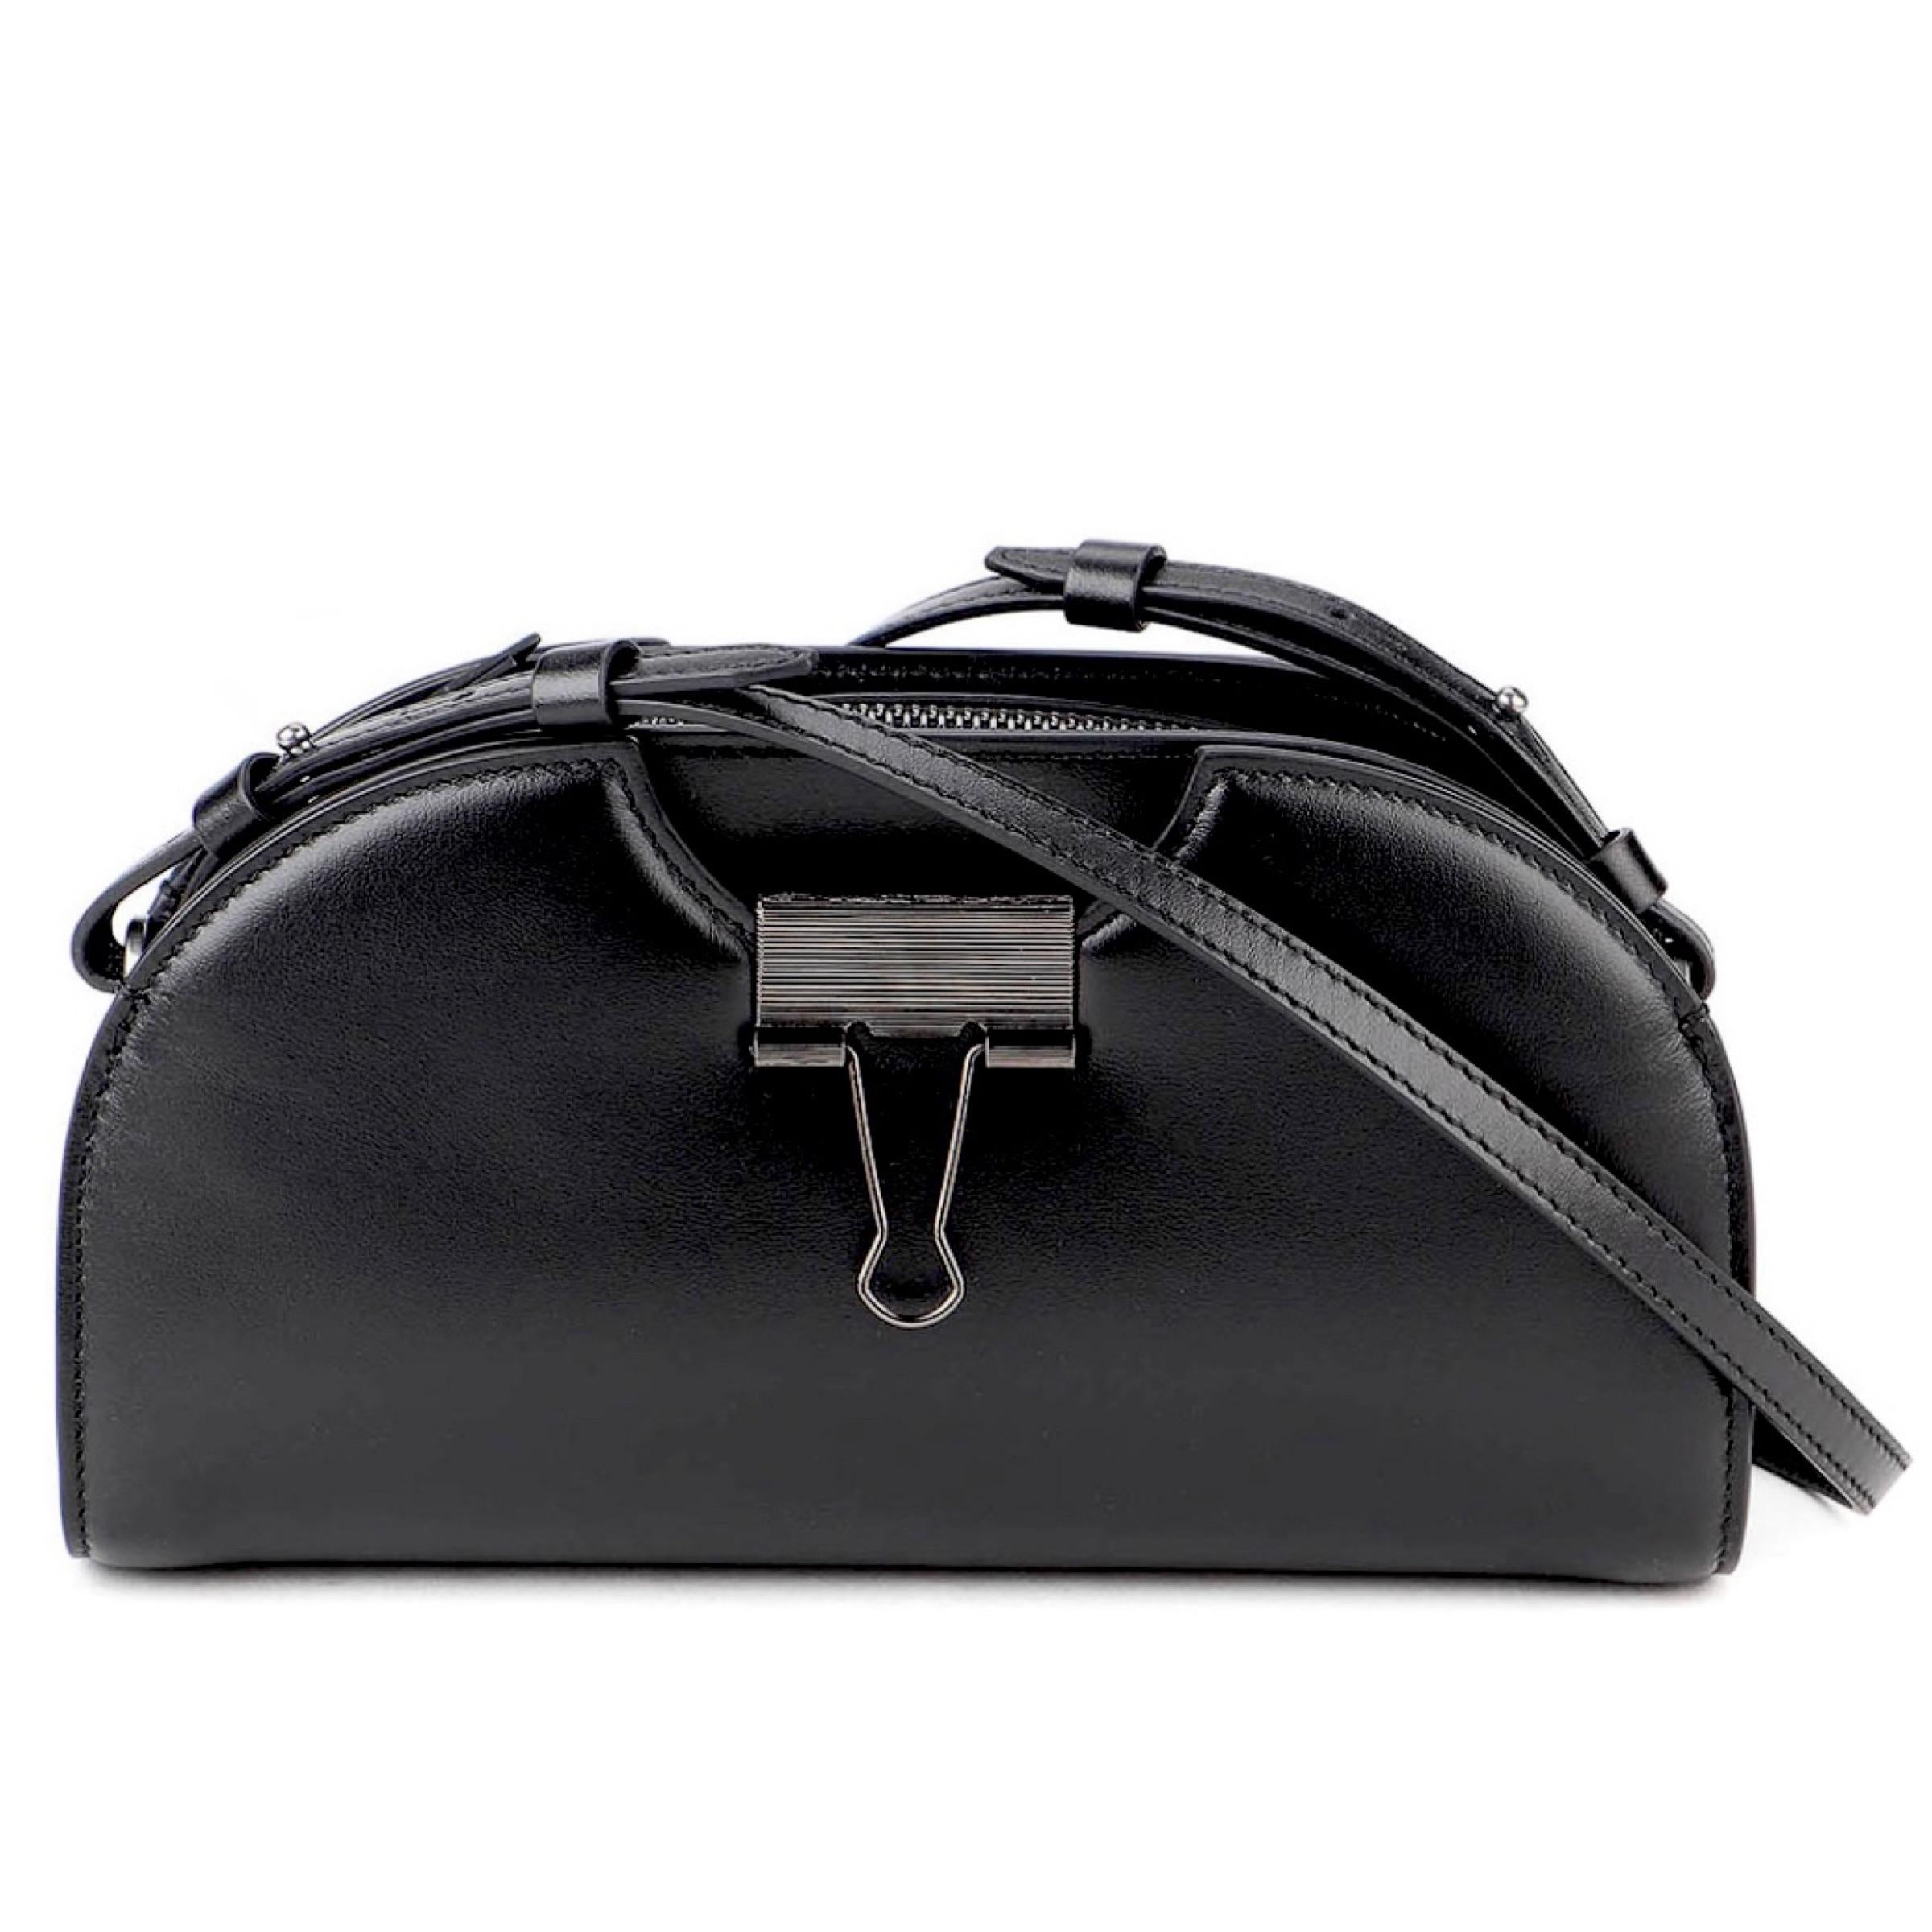 New Off-White Virgil Abloh Black Swiss Leather Camera Crossbody Bag

Authenticity Guaranteed

DETAILS
Brand: Off-White Virgil Abloh
Gender: Women
Category: Crossbody bag
Condition: Brand new
Color: Black
Material: Leather
Removable and adjustable